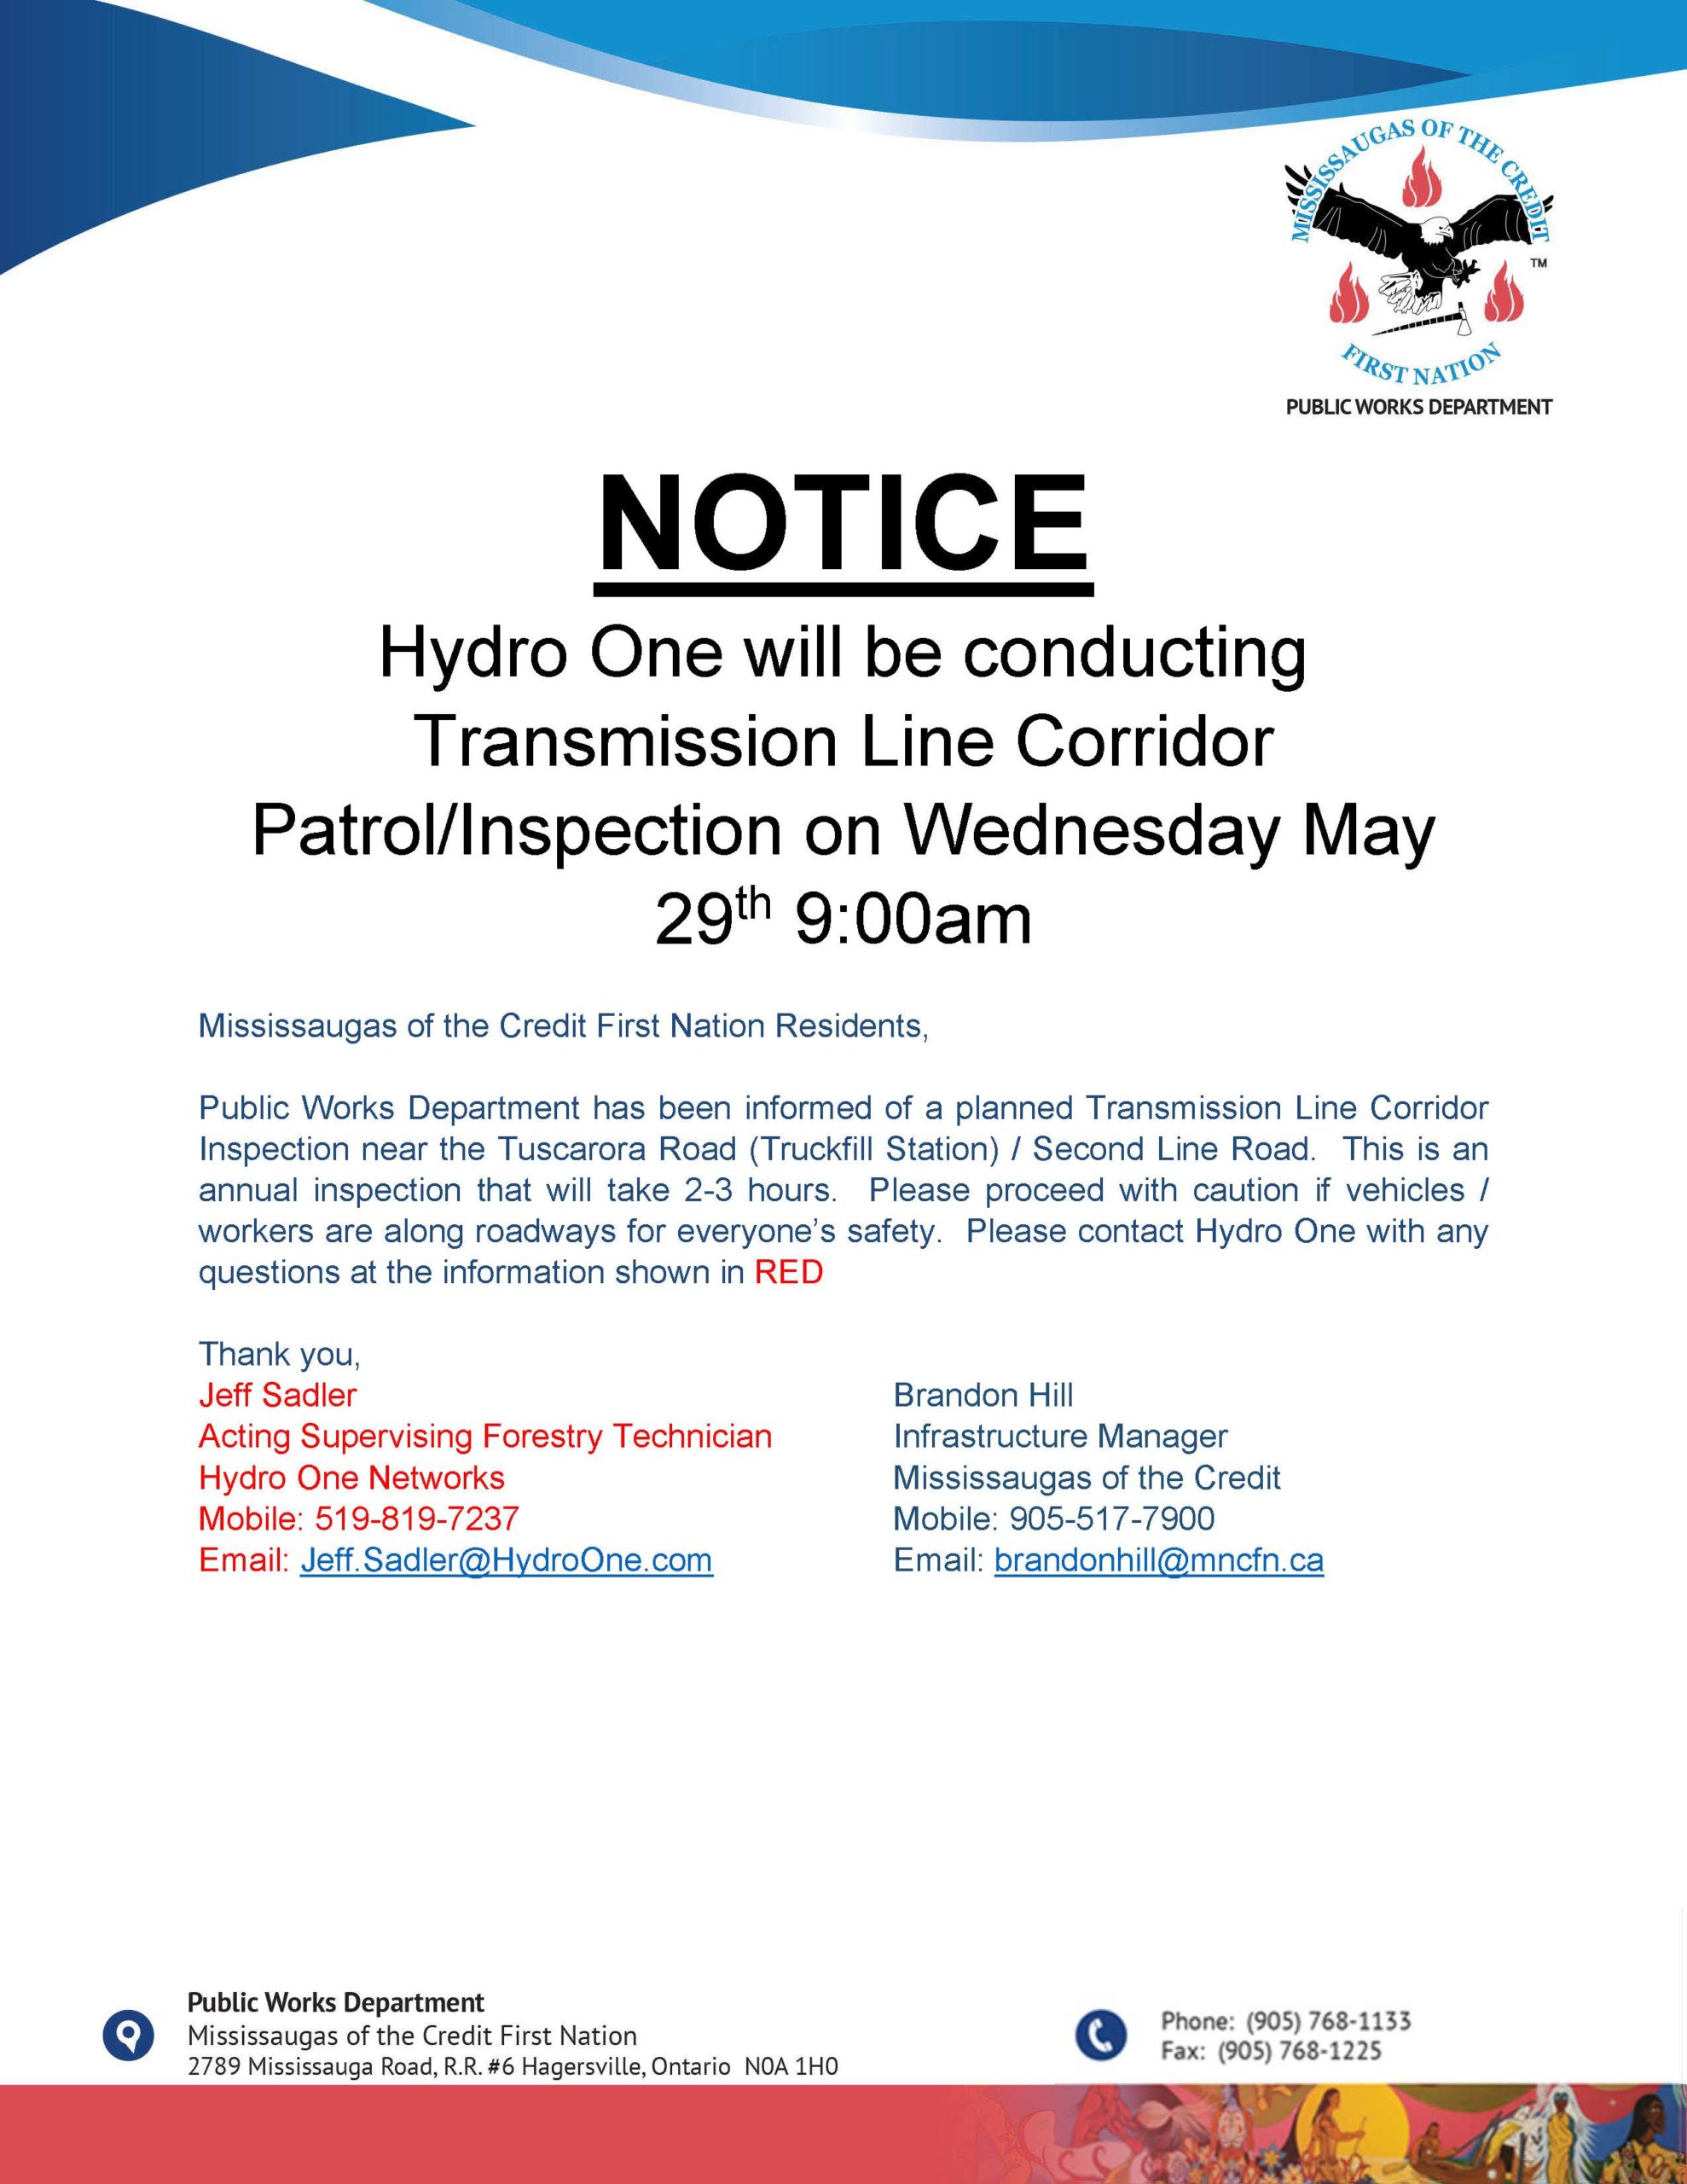 Hydro One will be conducting Transmission Line Corridor Patrol/Inspection on Wednesday May 29th